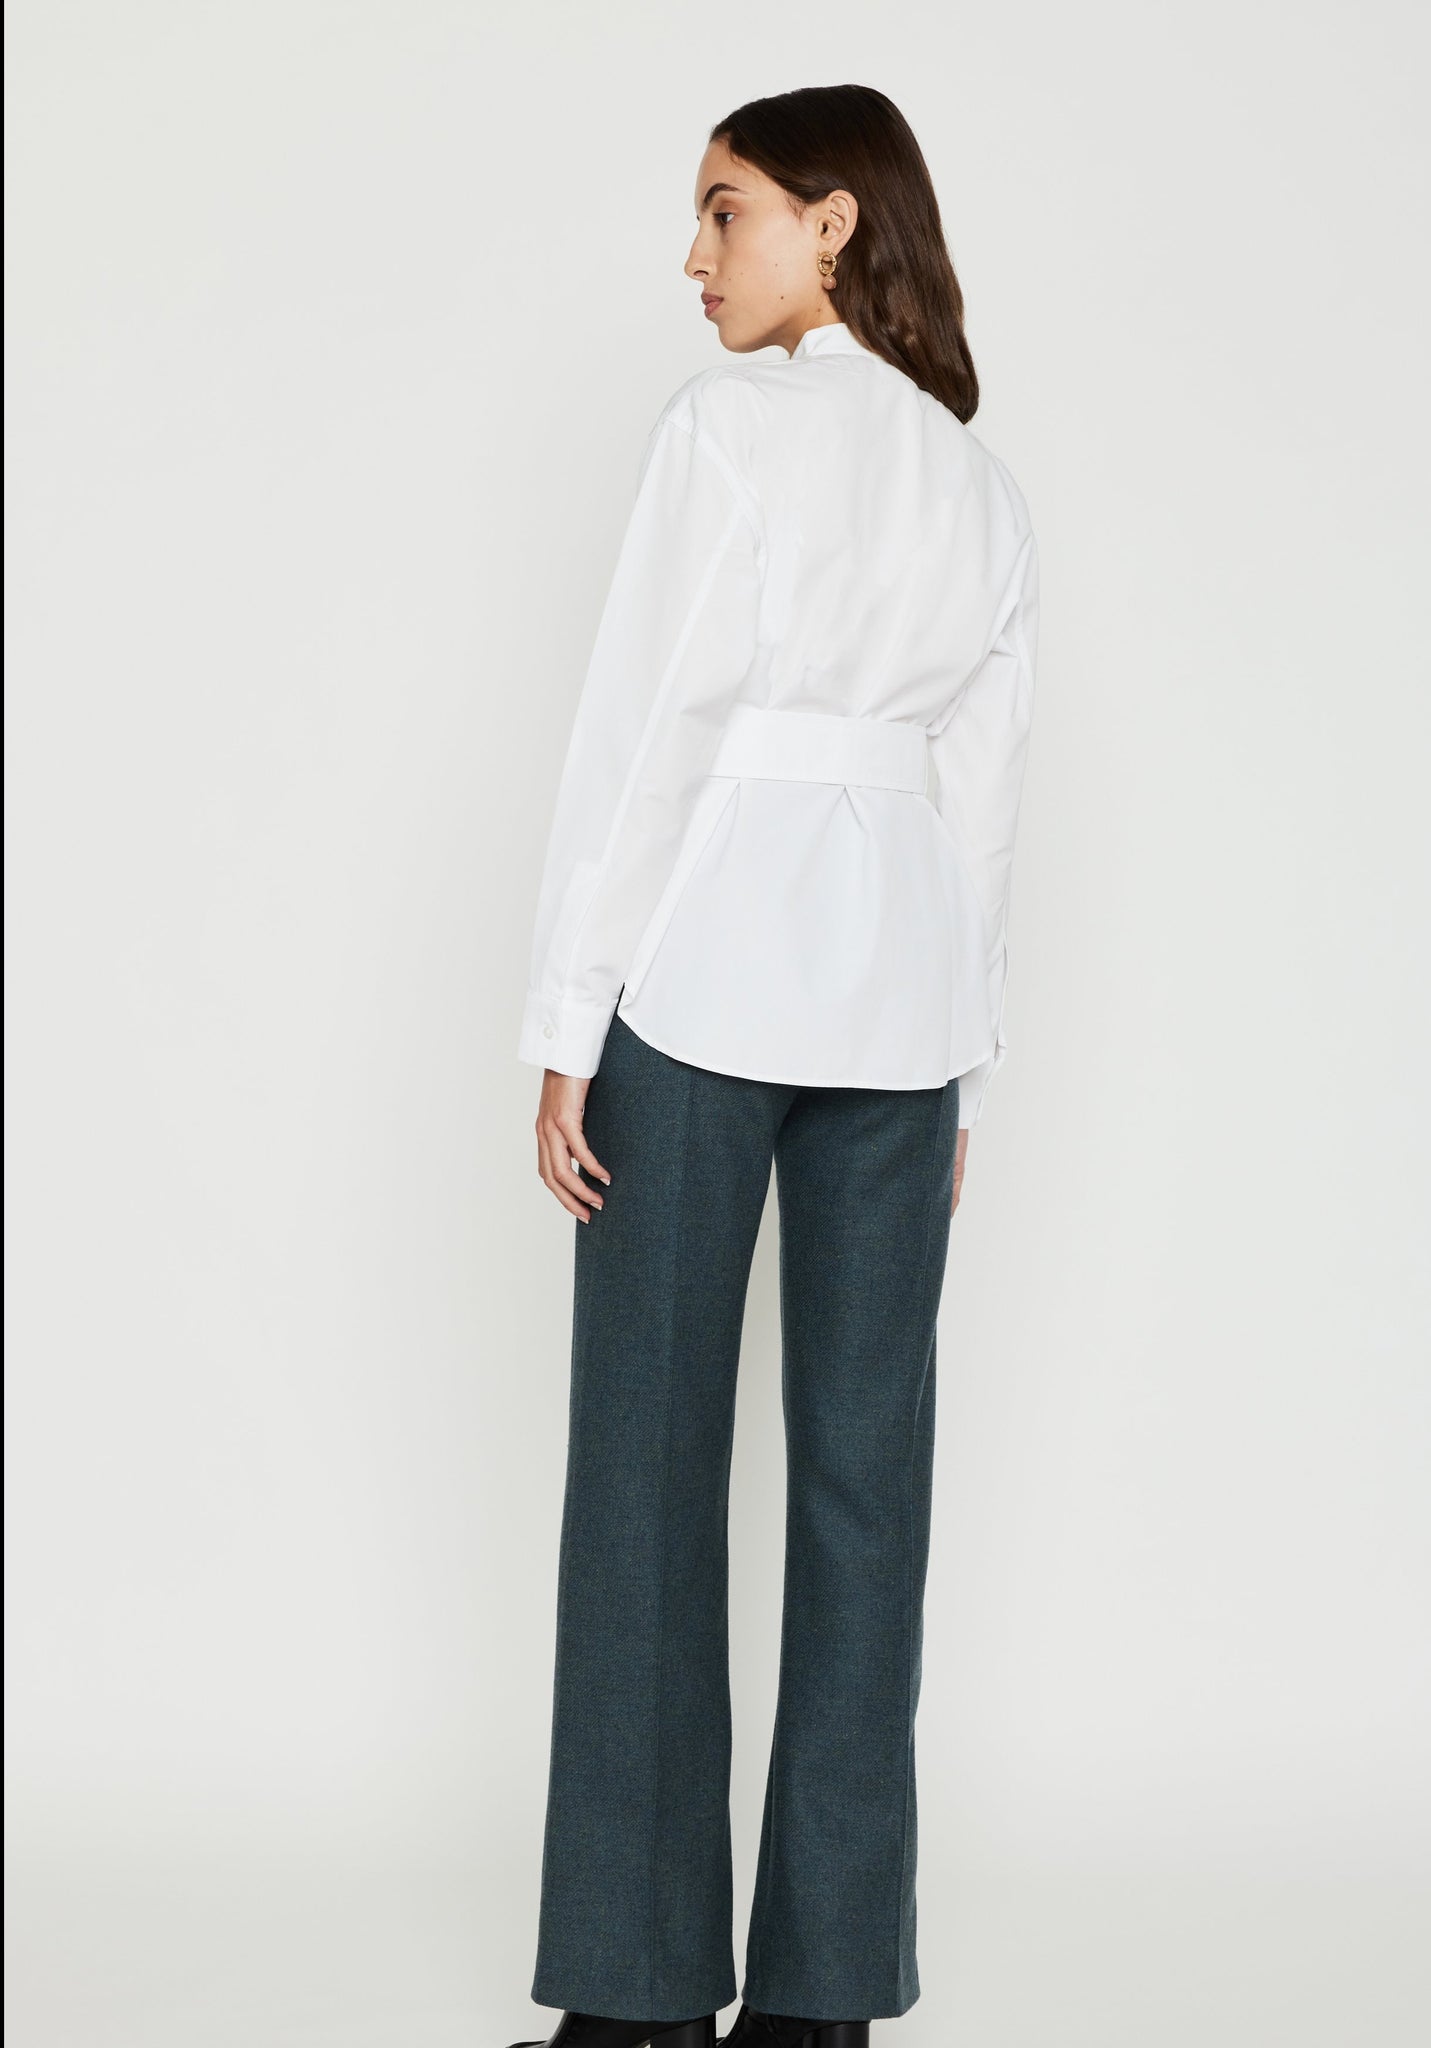 WHITE Shirt with Sleeve & Button detail